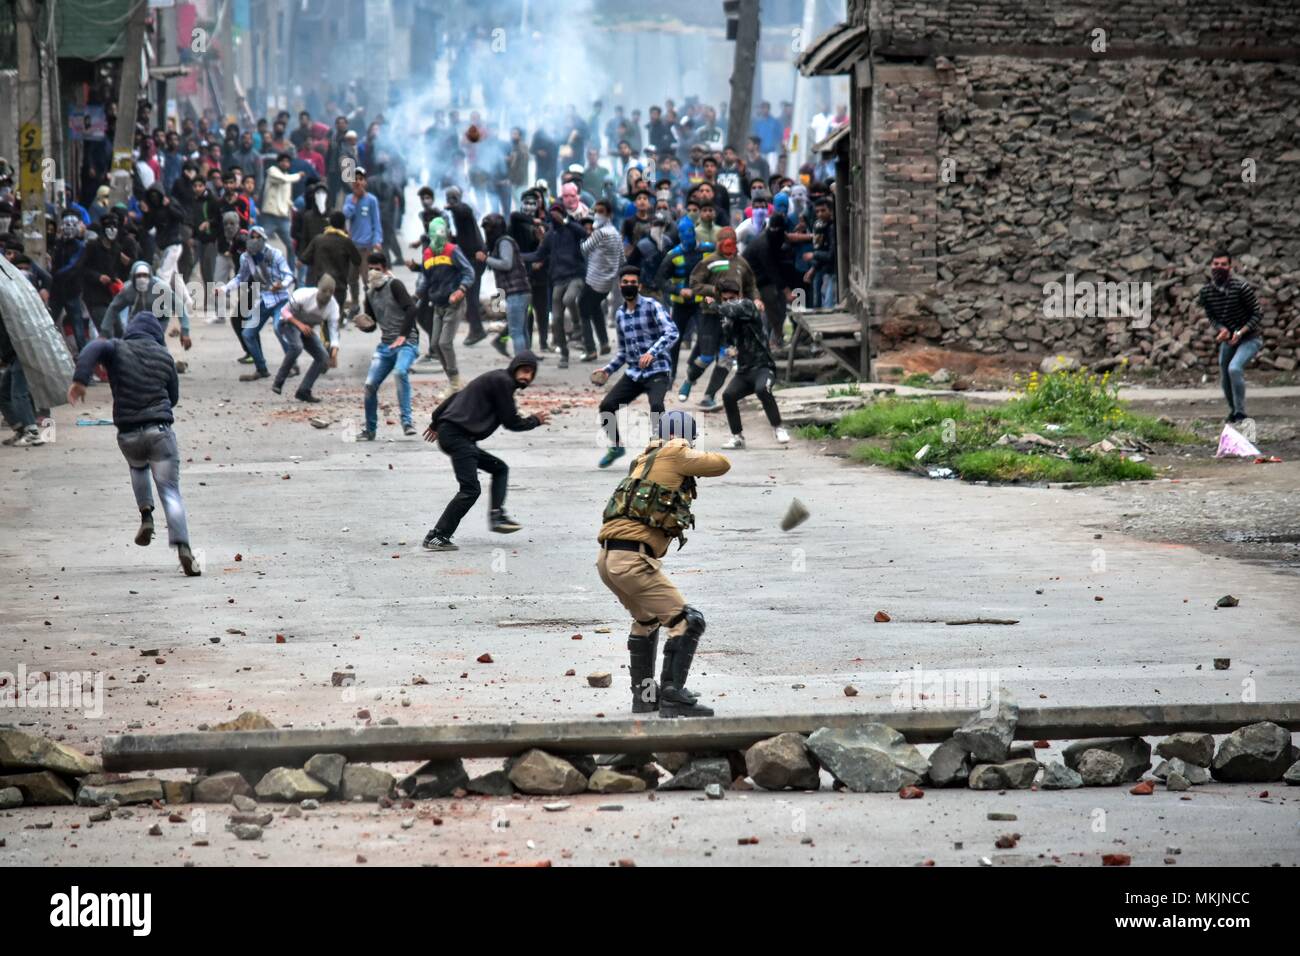 May 8, 2018 - Srinagar, J&K, India - Kashmiri protesters clash with government forces in Srinagar, Indian administered Kashmir. Fierce clashes broke out between government forces and Kashmiri protesters in Srinagar on Tuesday as the valley continued to remain tense over the killing of 11 people including 5 militants and 6 civilians in Indian administered Kashmir. Police used tear smoke shells and shot gun pellets to disperse hundreds of demonstrators who hurled rocks and chanted anti-Indian and pro-freedom slogans. Credit: Saqib Majeed/SOPA Images/ZUMA Wire/Alamy Live News Stock Photo